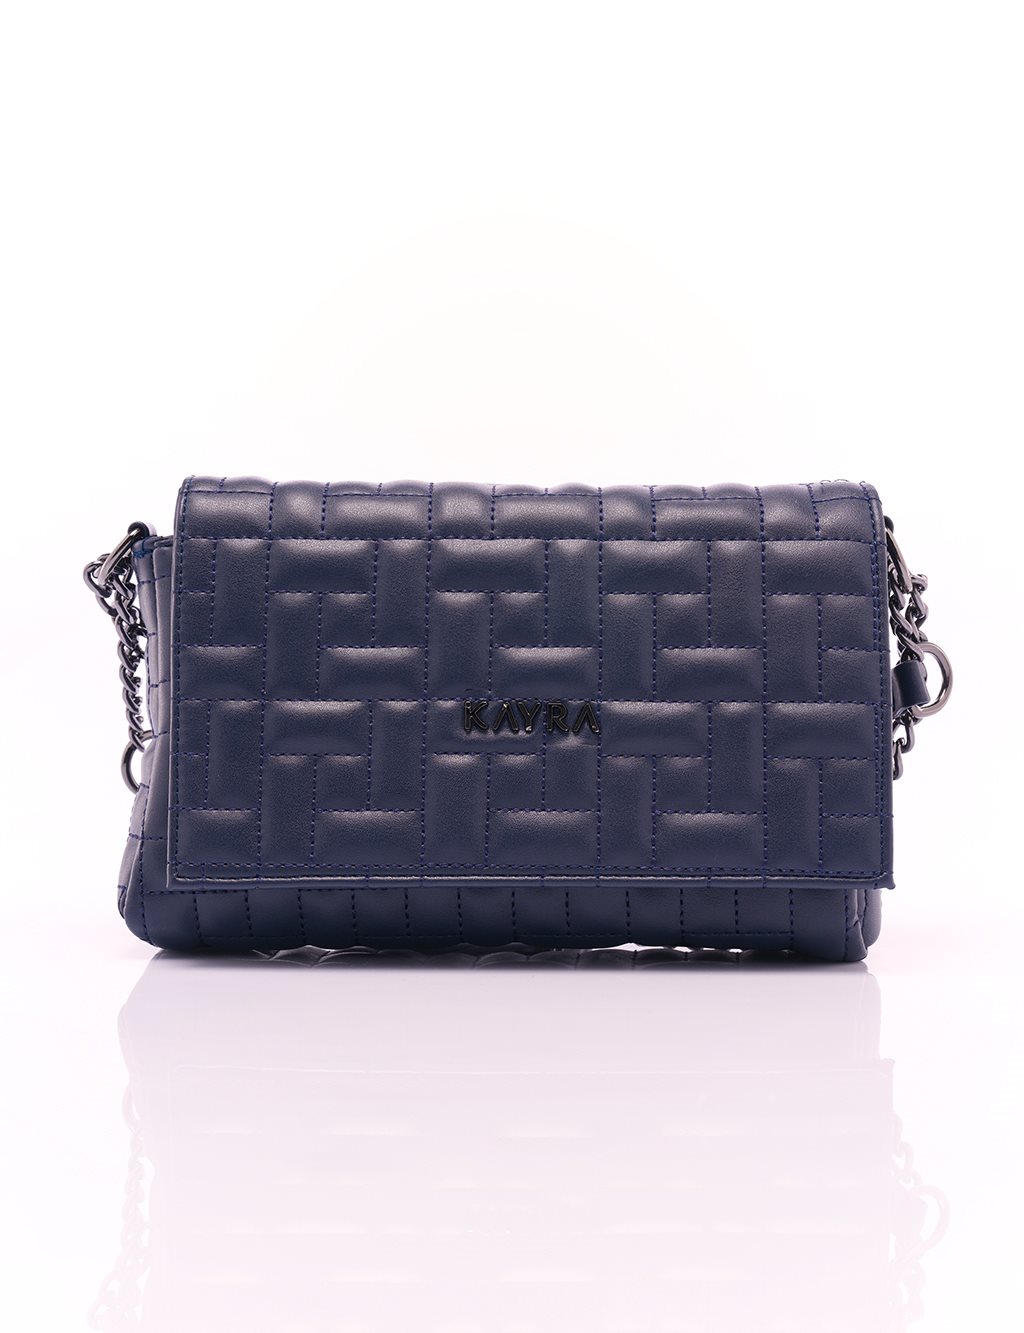 Covered Faux Leather Rectangular Form Bag Navy Blue